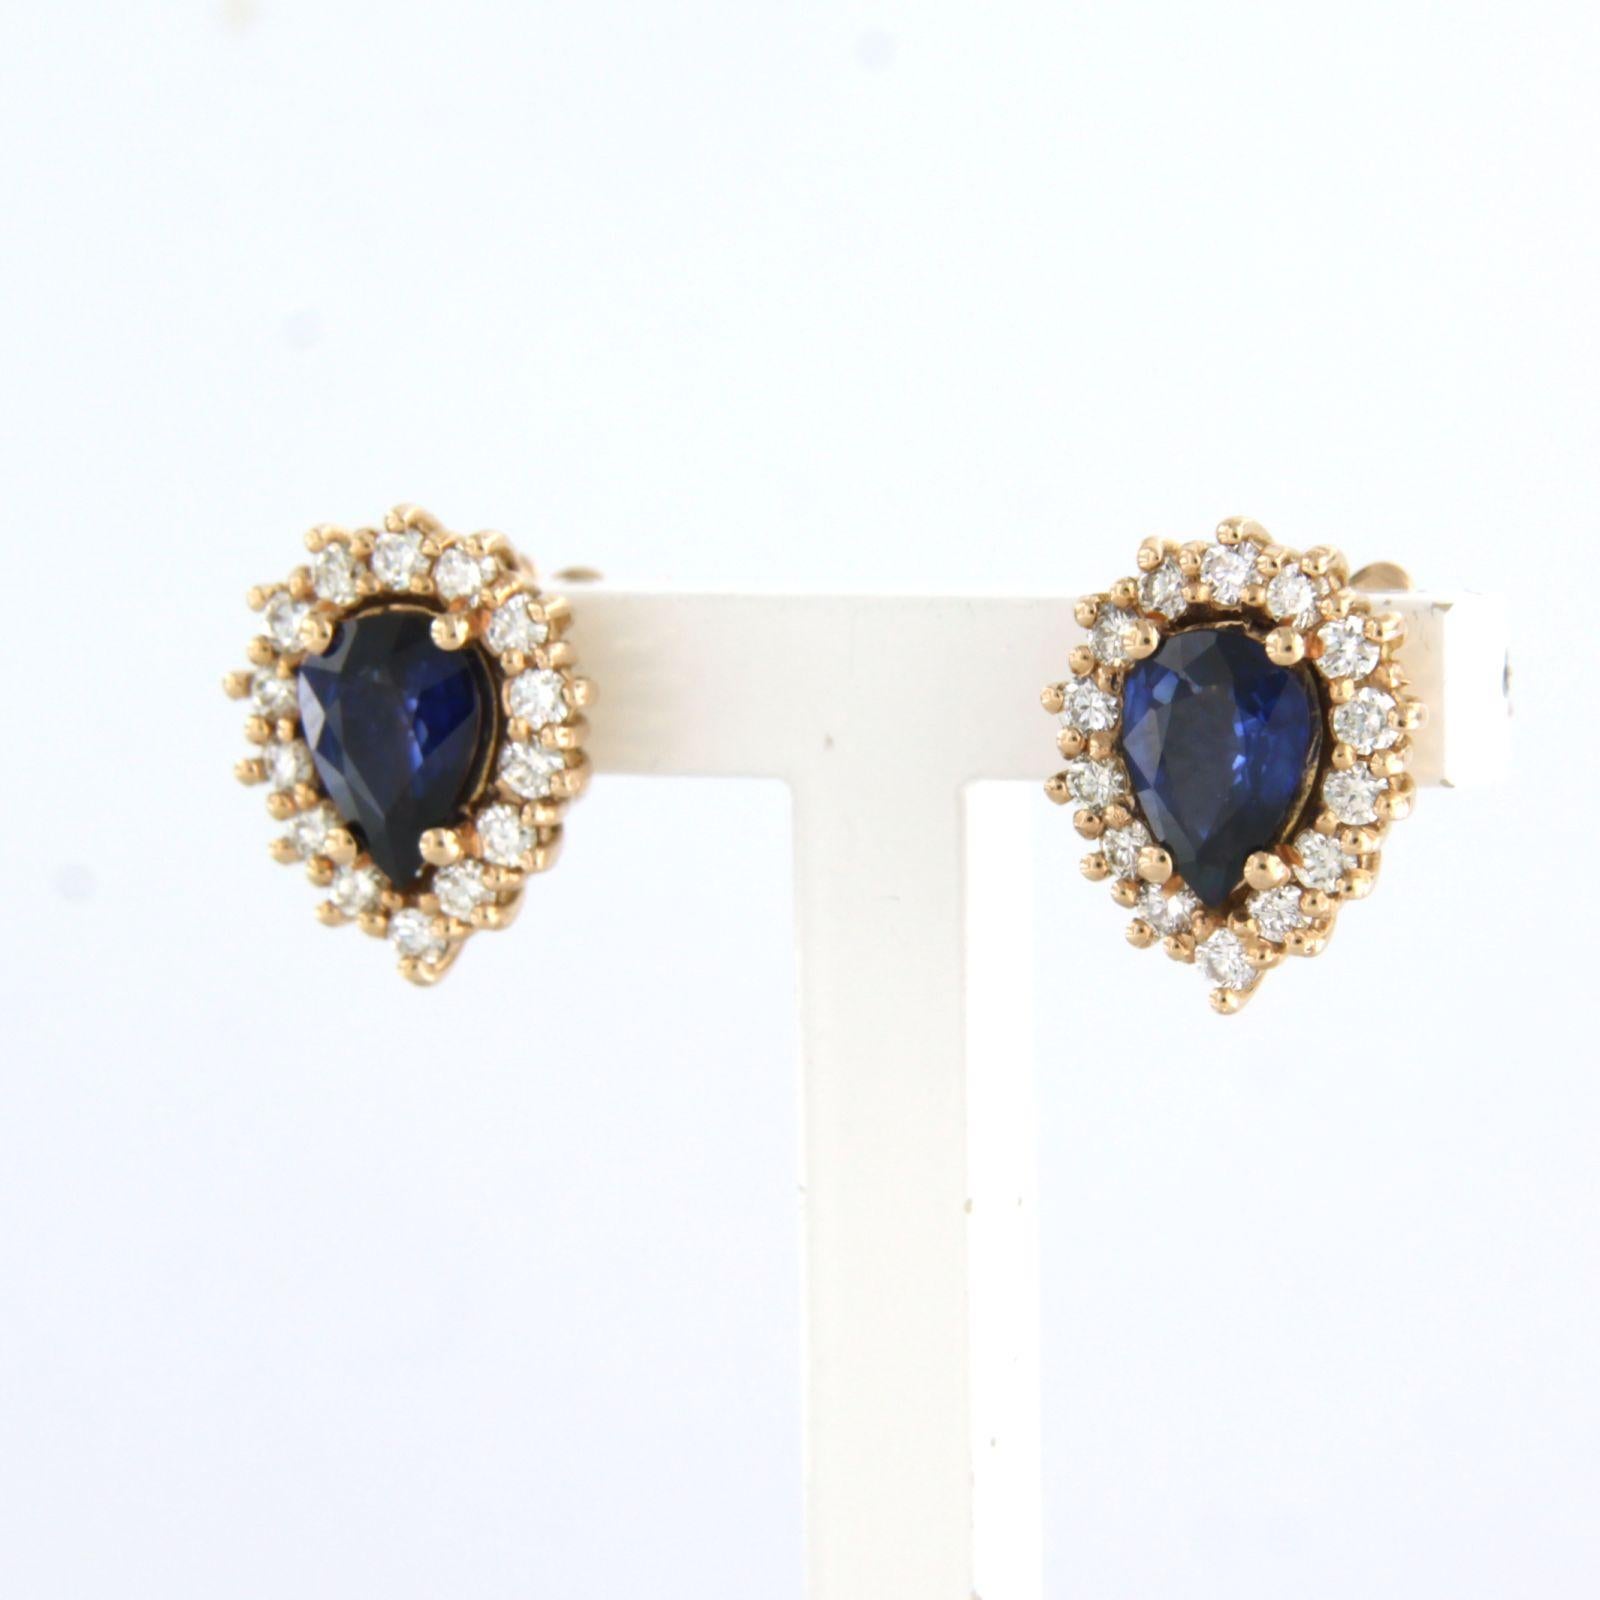 18k pink gold stud earrings set with sapphire 1.30 ct and brilliant cut diamonds total approximately 0.44 ct - F/G - VS/SI

detailed description

the top of the ear stud is 1.2 cm long by 9.6 mm wide

weight 4.4 grams

set with

- 2 x 7.0 mm x 5.0